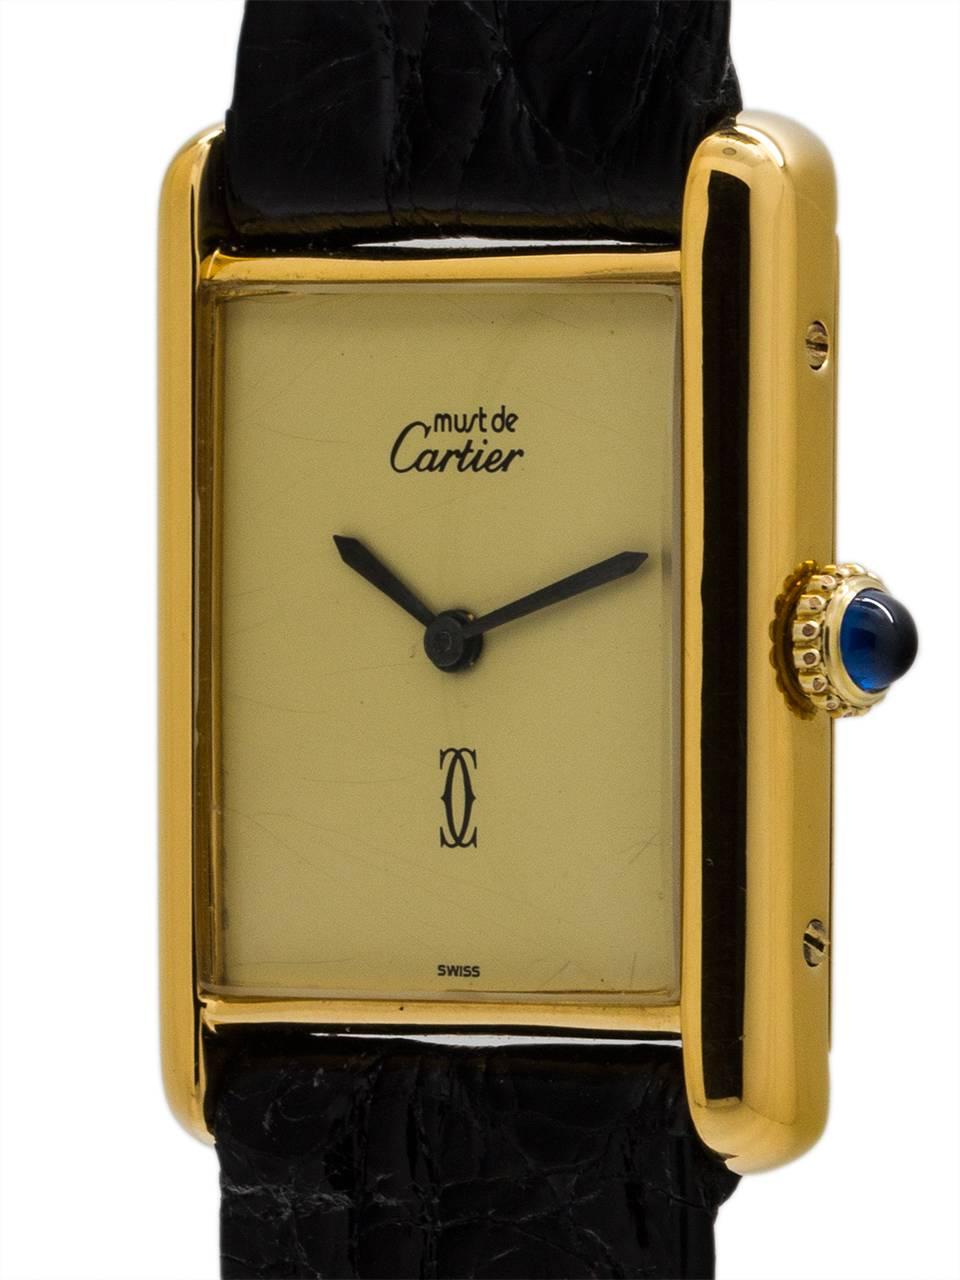 
Cartier Man’s Tank Louis vermeil circa 1970s. 23.5 x 31mm case with mineral glass crystal and blue cabachon sapphire crown. With original cream color dial signed Must de Cartier with double C logo and gold hands. Powered by manual wind movement.